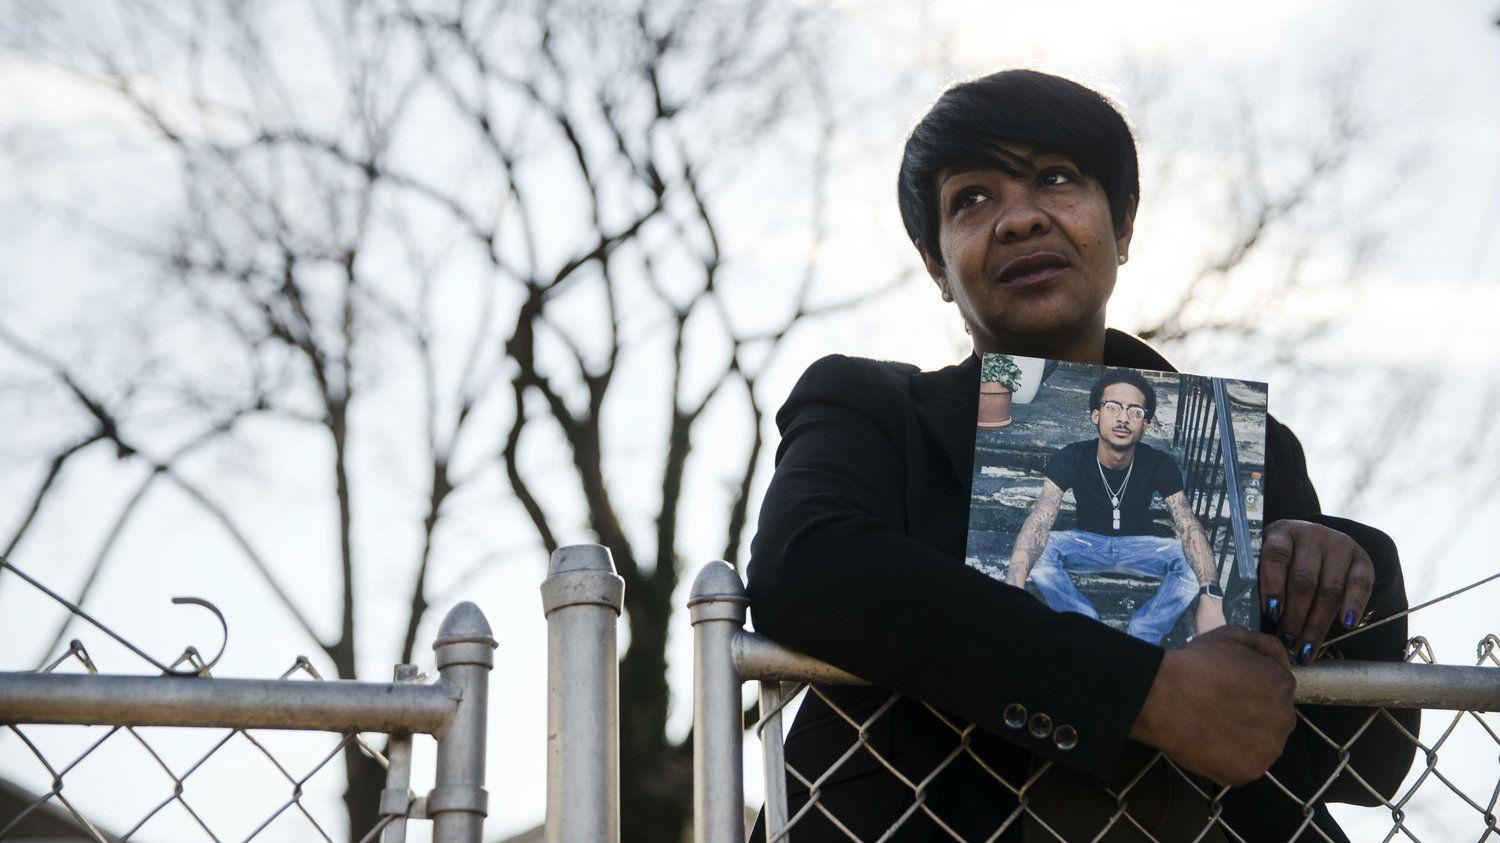 Trina Singleton’s son, Darryl, was just 24 when he was murdered. ‘I felt hurt. His whole life had been reduced to a sentence, or not even a whole sentence’